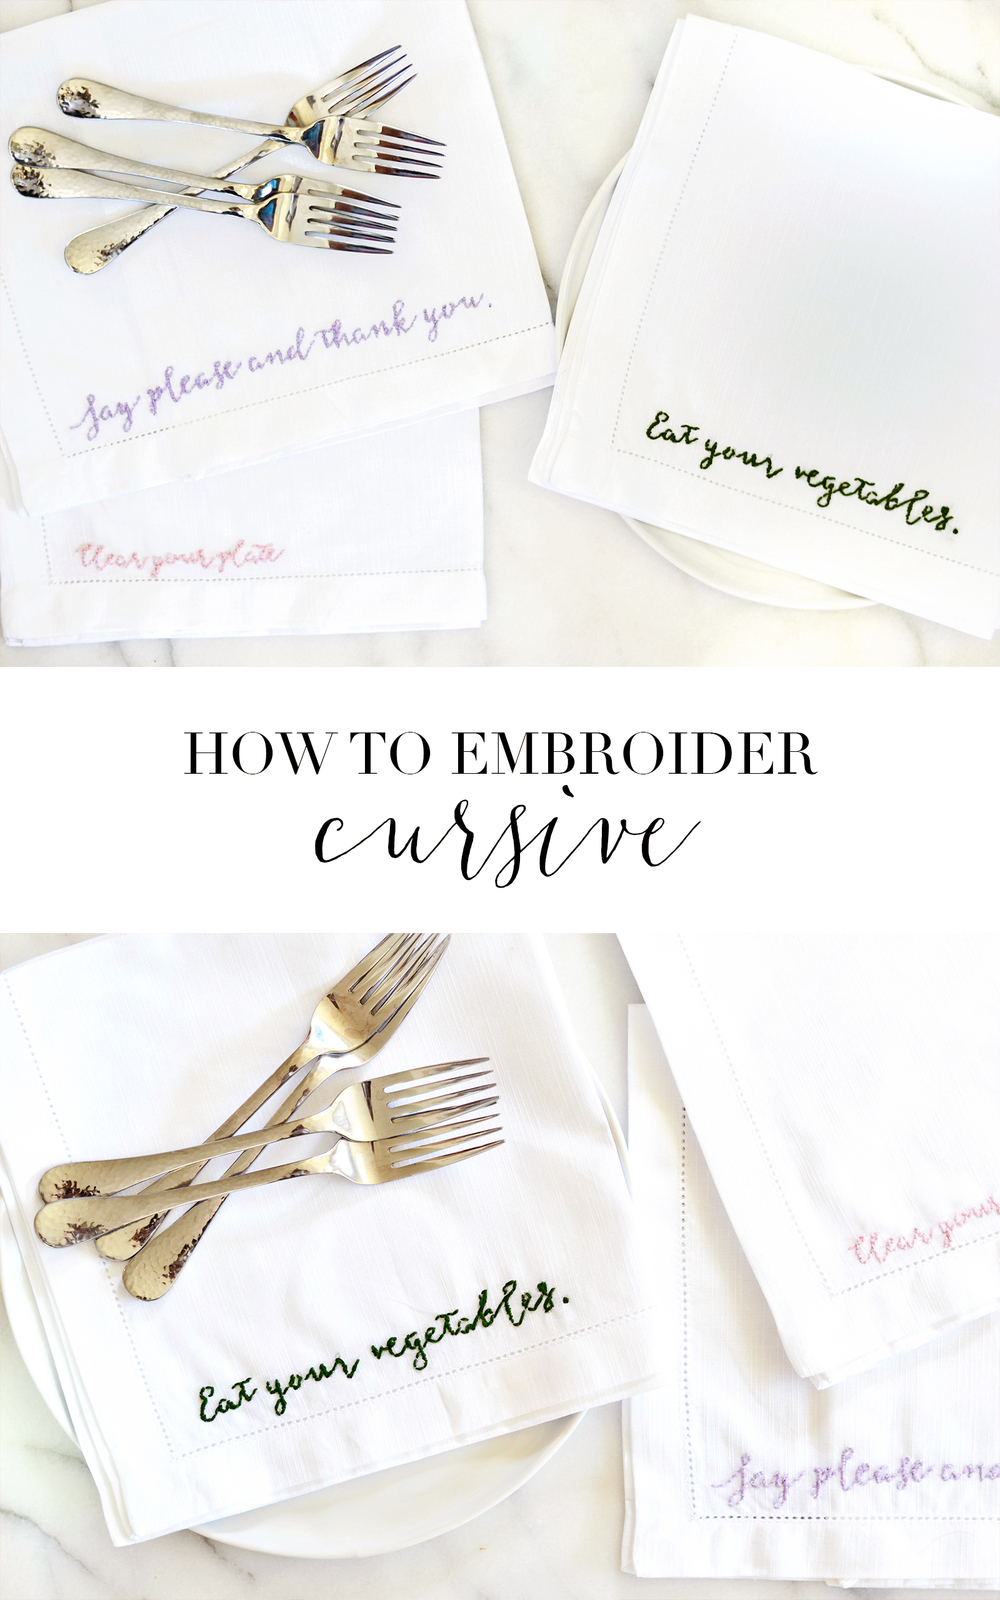 Techniques for embroidering cursive & fonts from boxwoodavenue.com